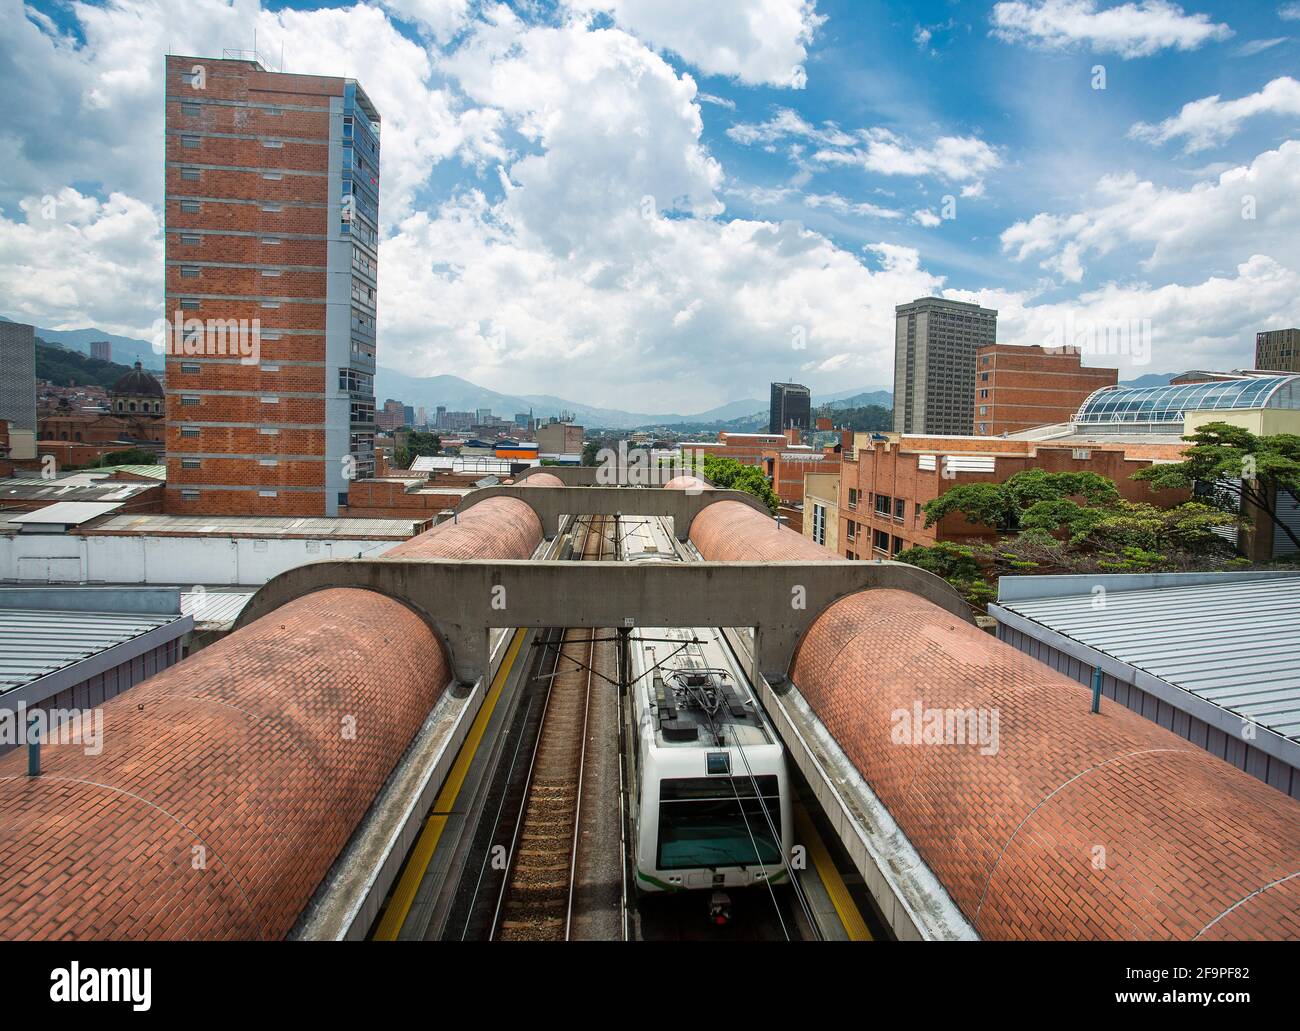 Medellin, Antioquia. Colombia - February 25, 2017. The Metro was the first modern mass transportation system in Colombia. Its construction began on Ap Stock Photo